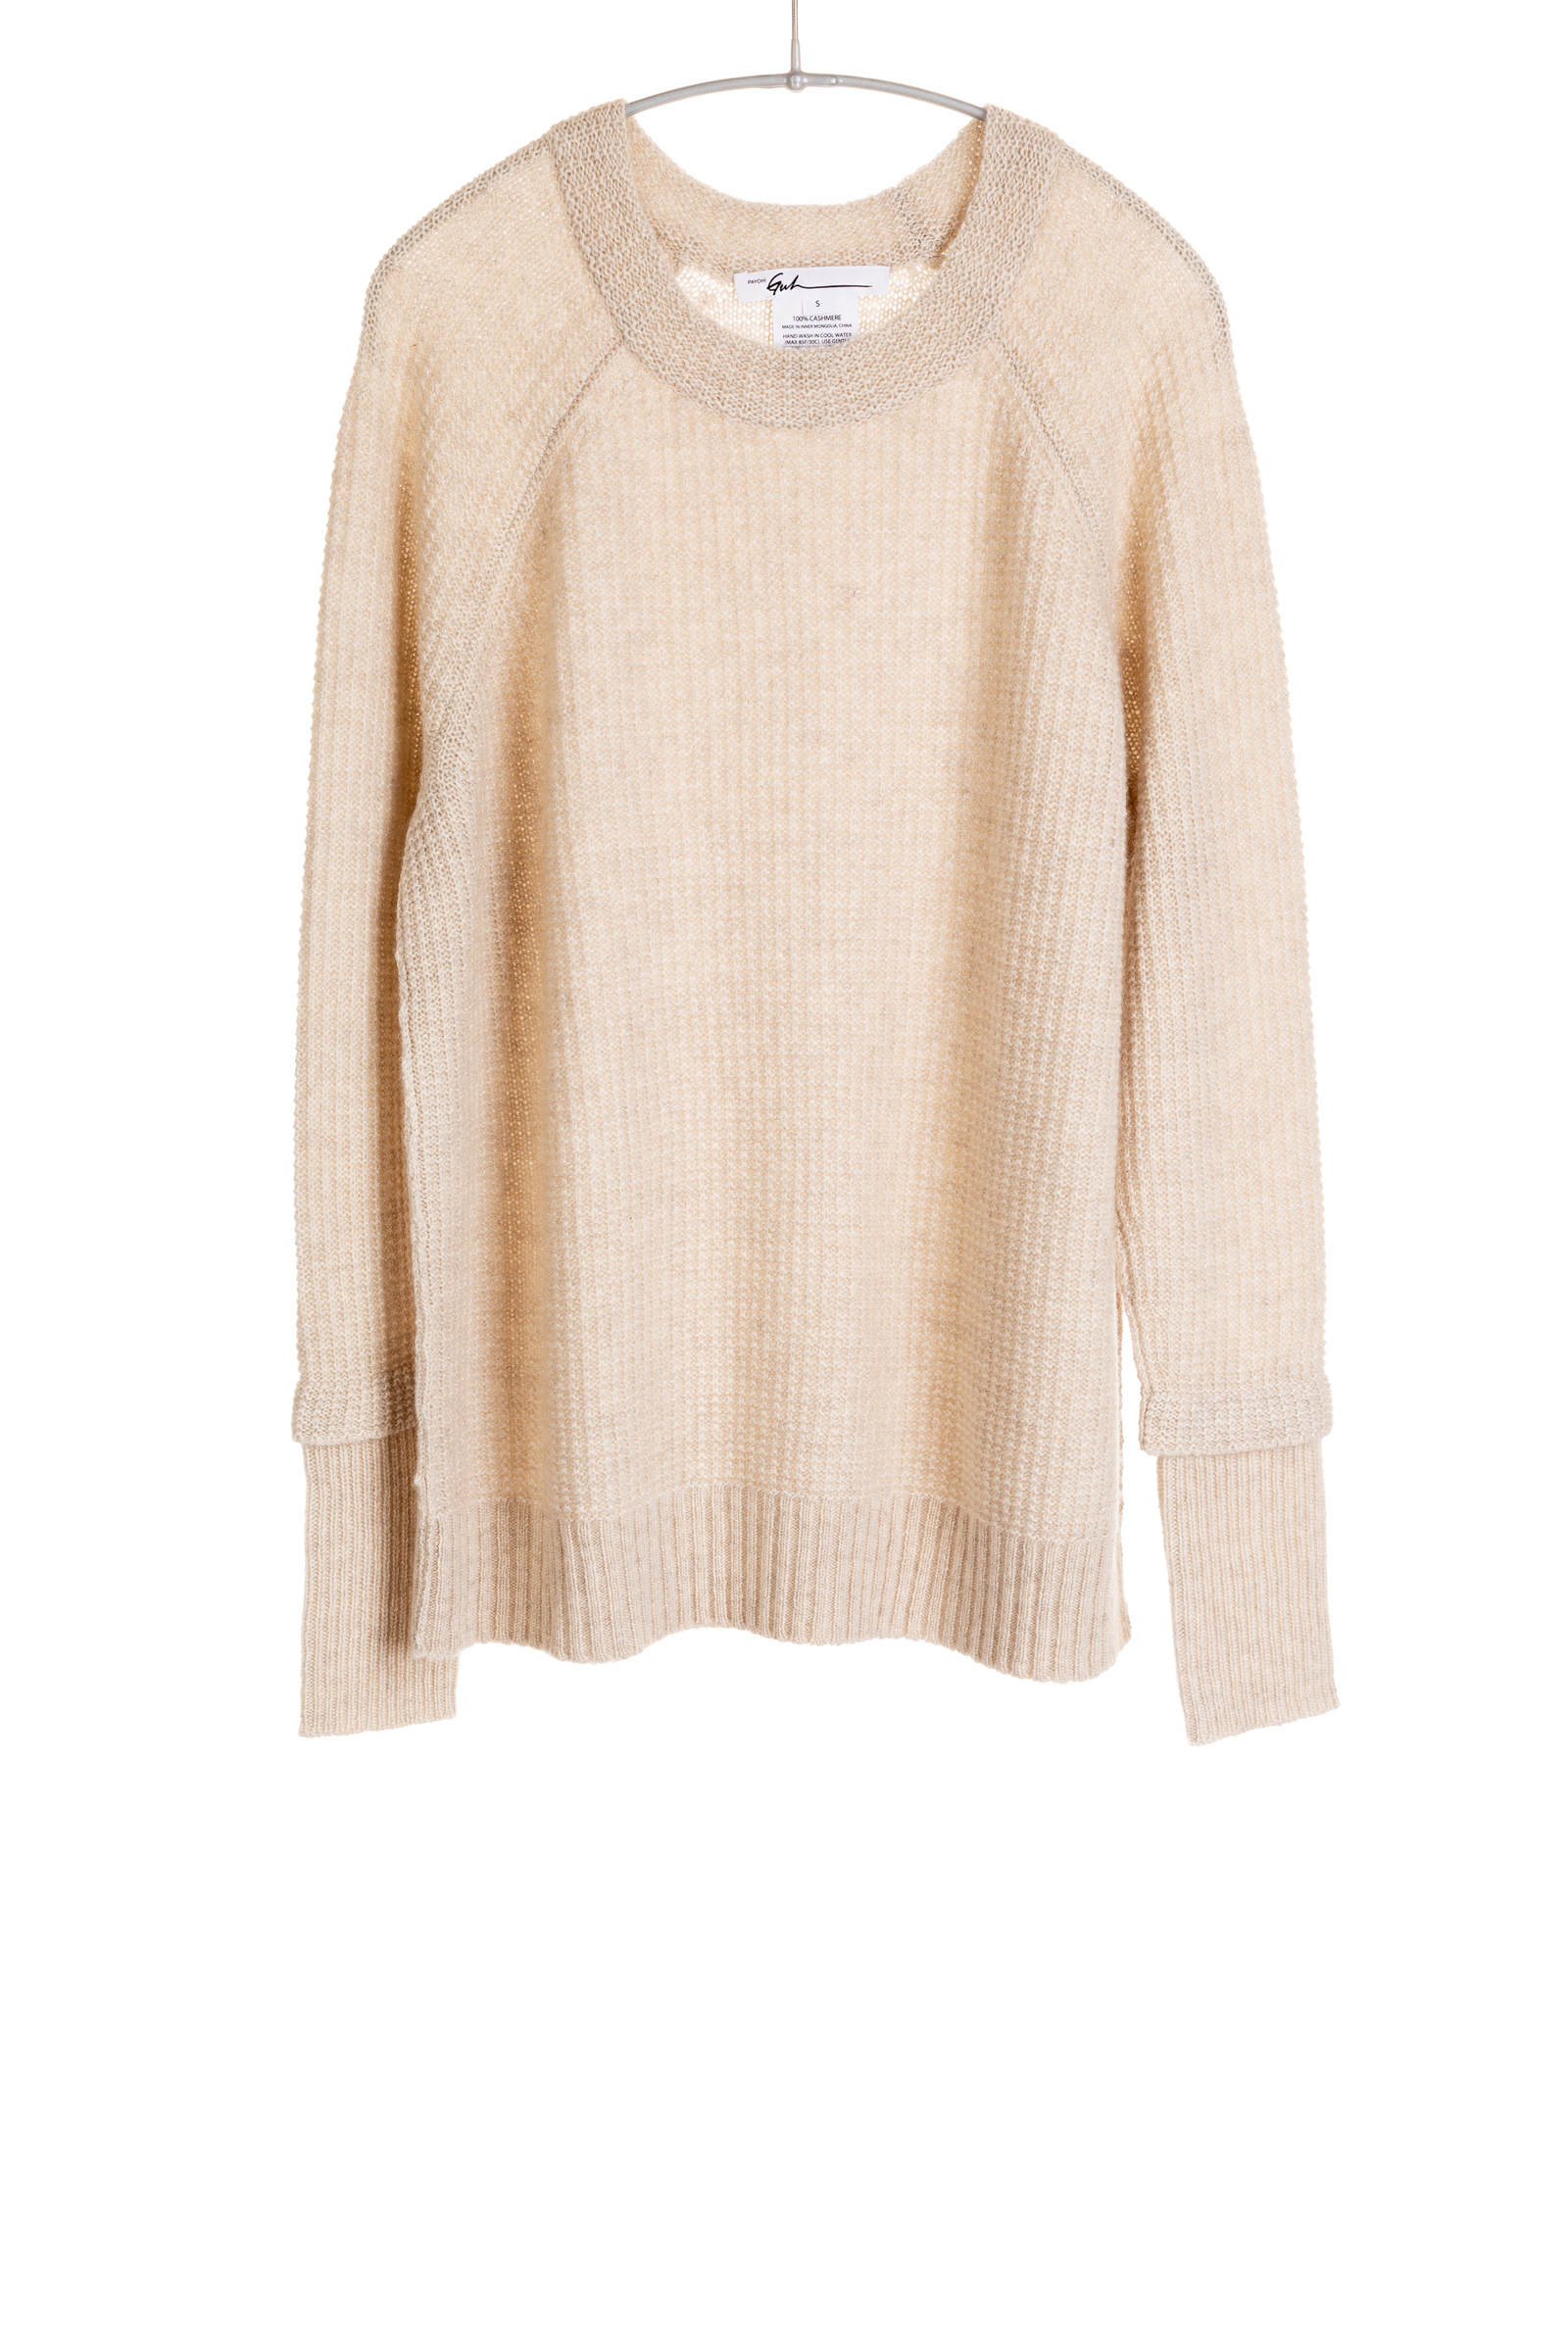 Textured Crew | Cashmere | Oatmeal – Paychi Guh